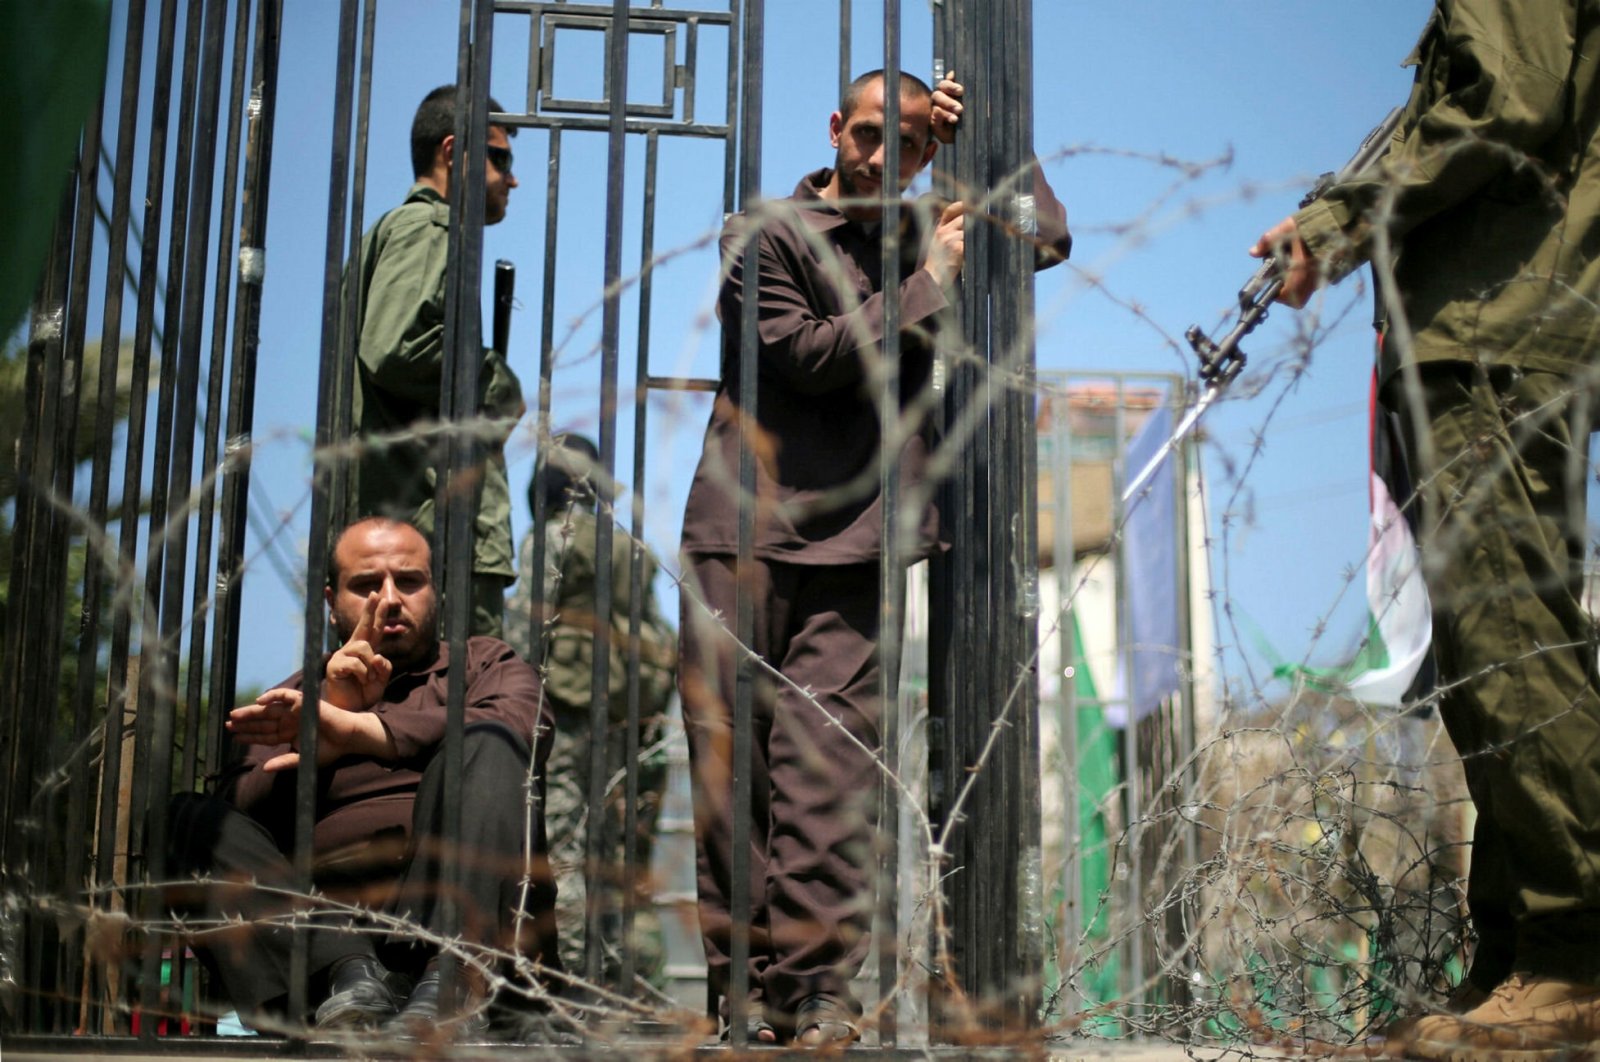 Men play the roles of jailed Palestinians and Israeli soldiers during a rally in support of Palestinian prisoners on hunger strike in Israeli jails, Gaza City, Palestine, April 2017. (Reuters Photo)